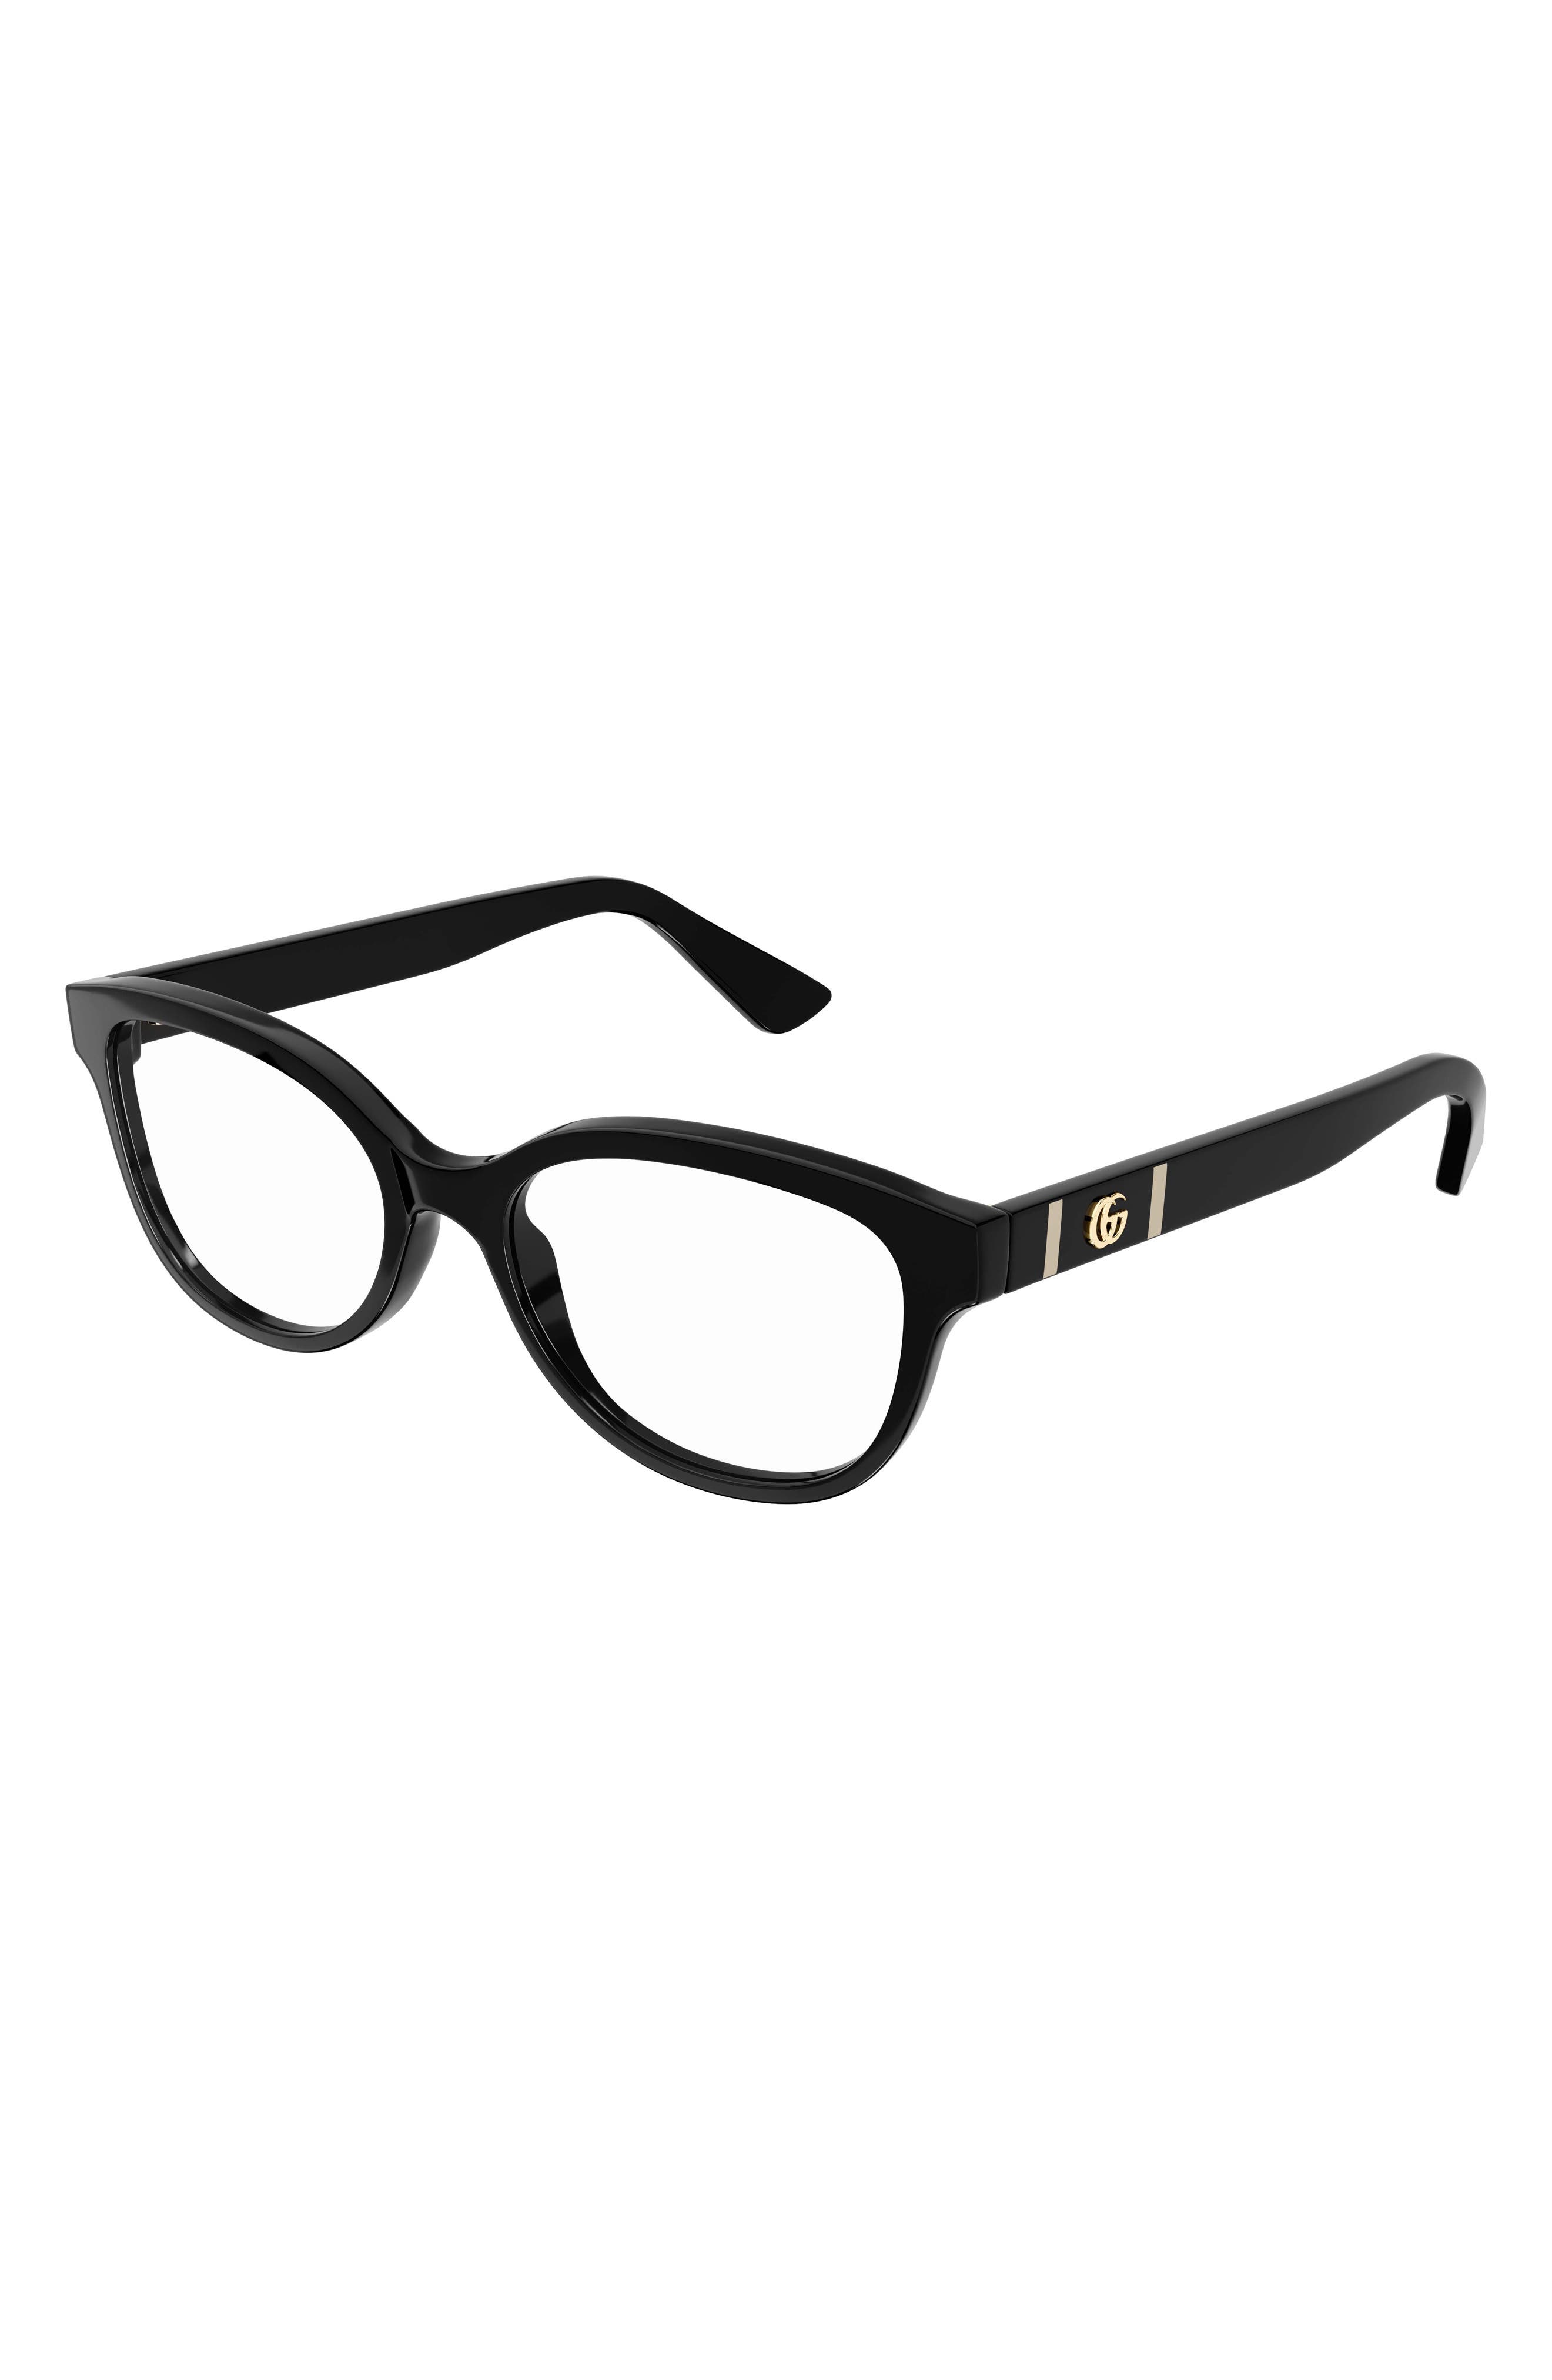 Gucci 53mm Rectangle Optical Glasses in Black at Nordstrom